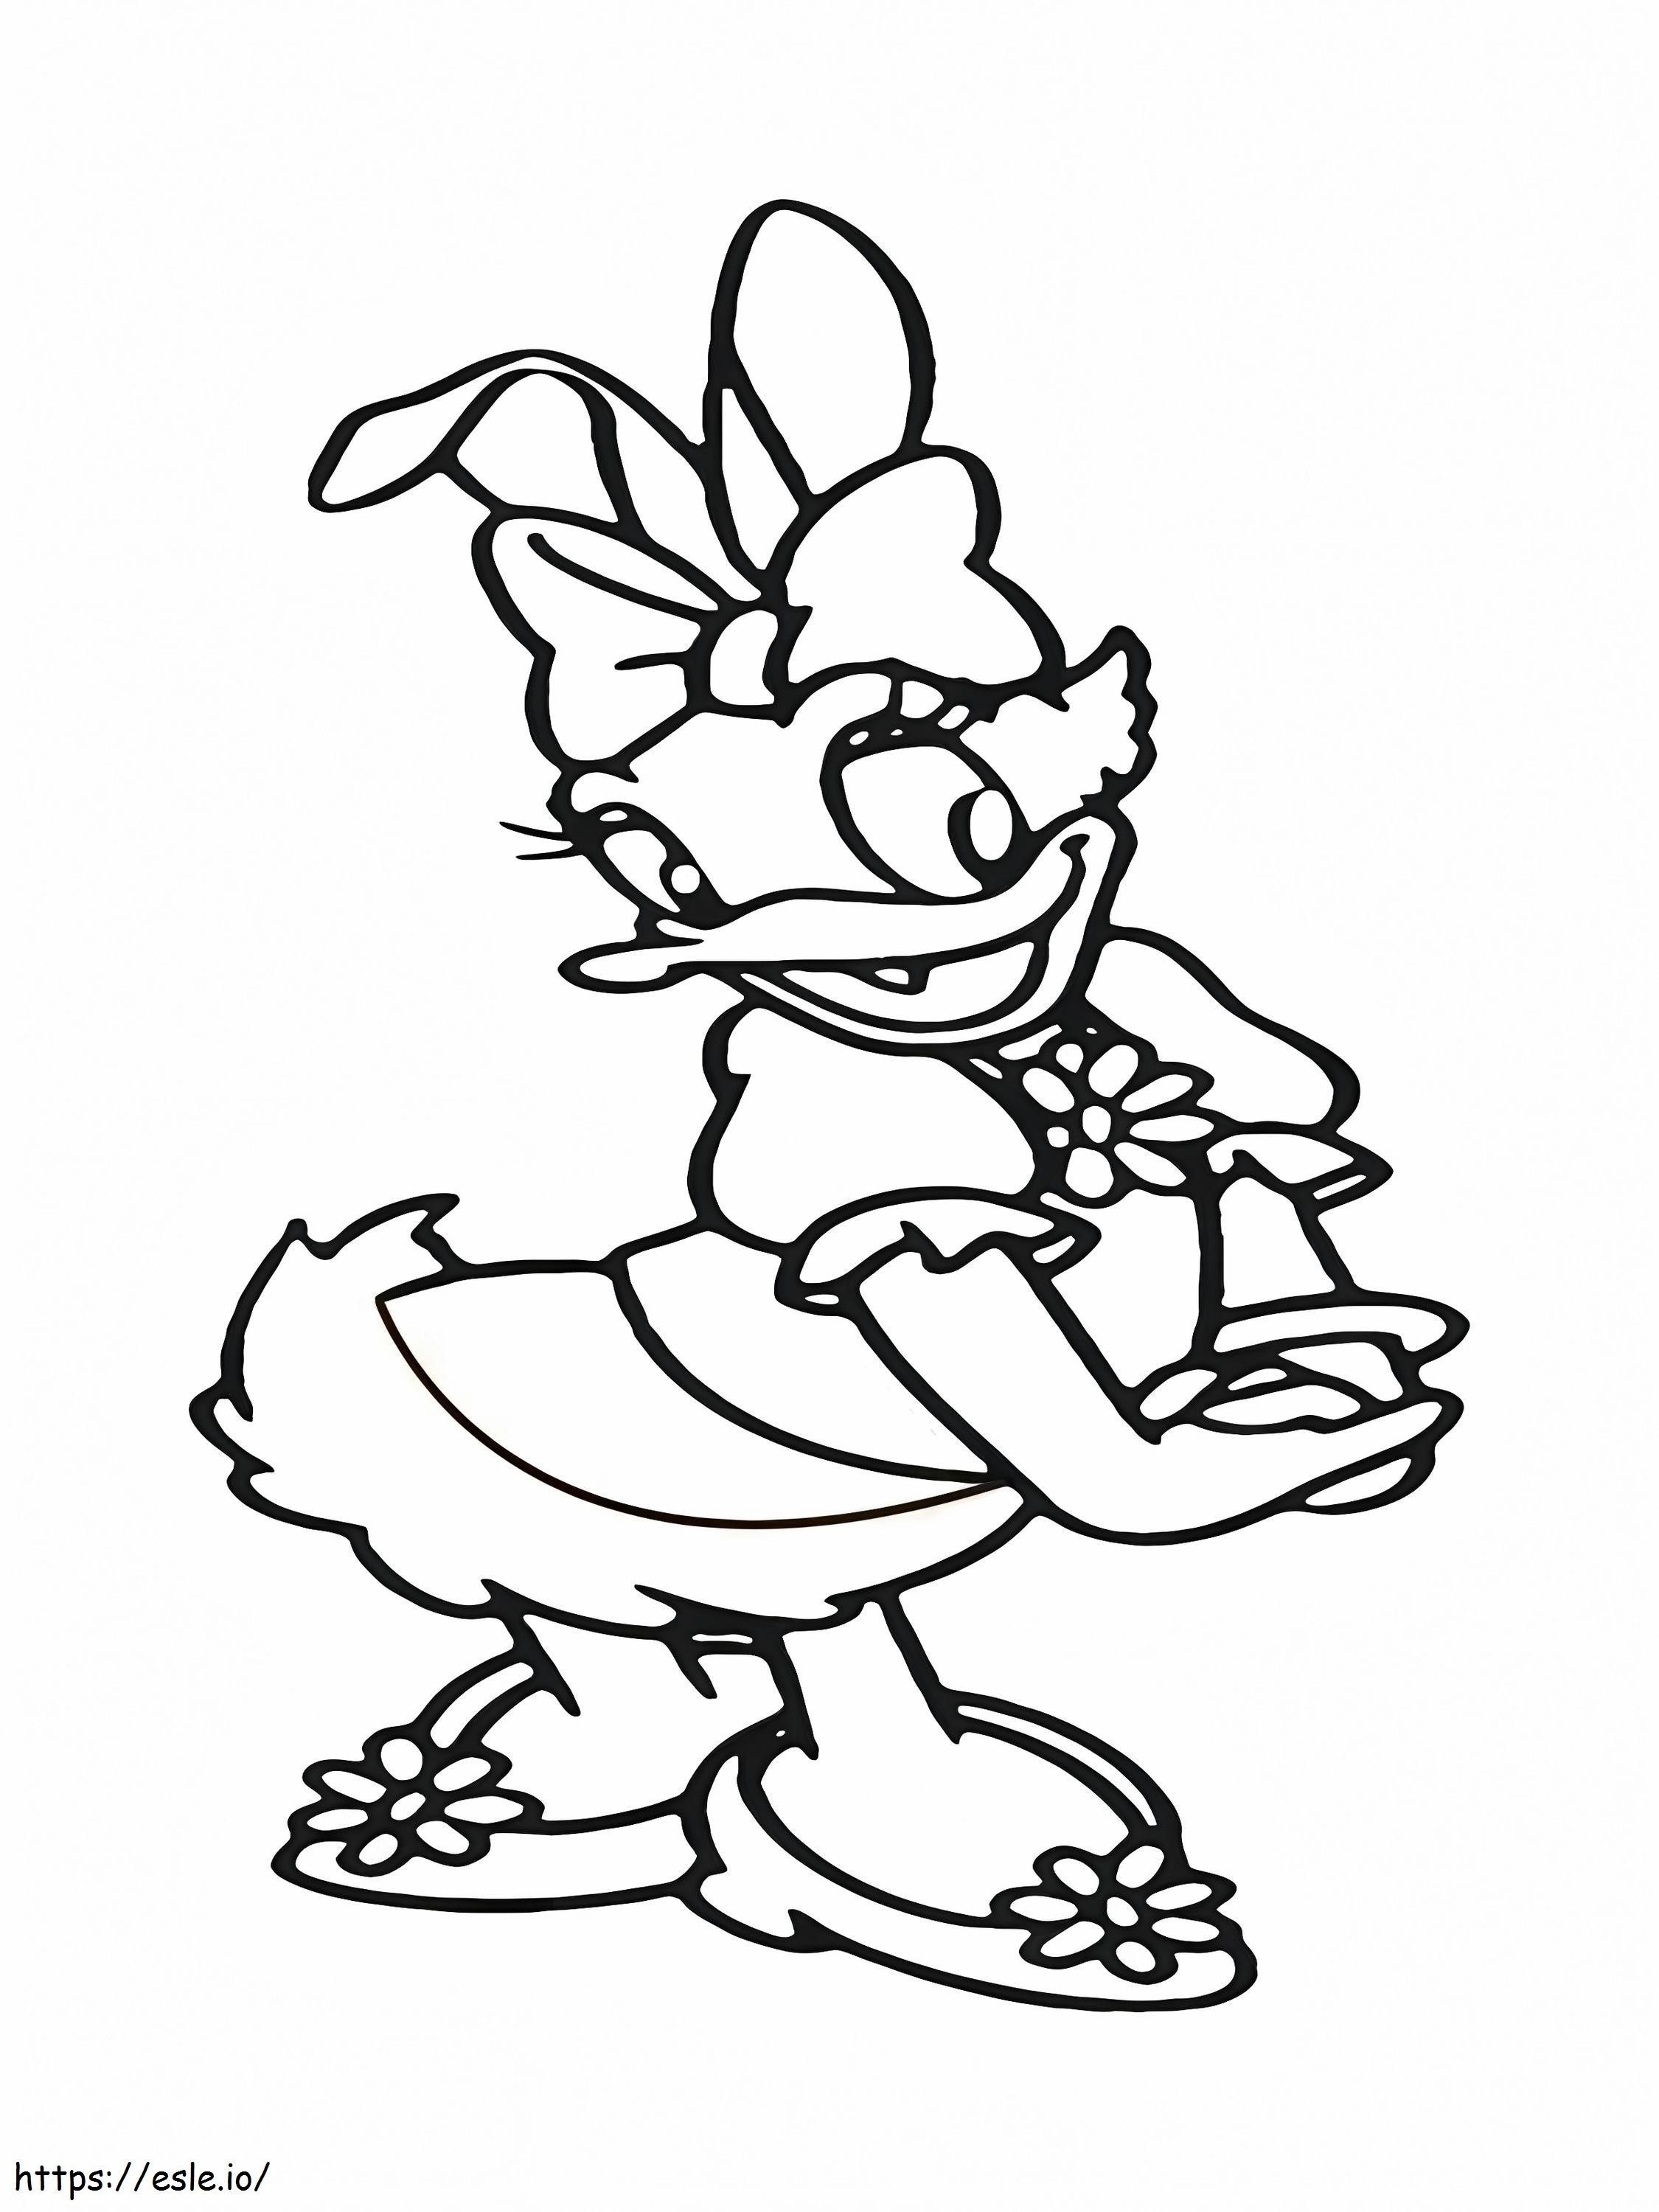 Happy Daisy Duck coloring page